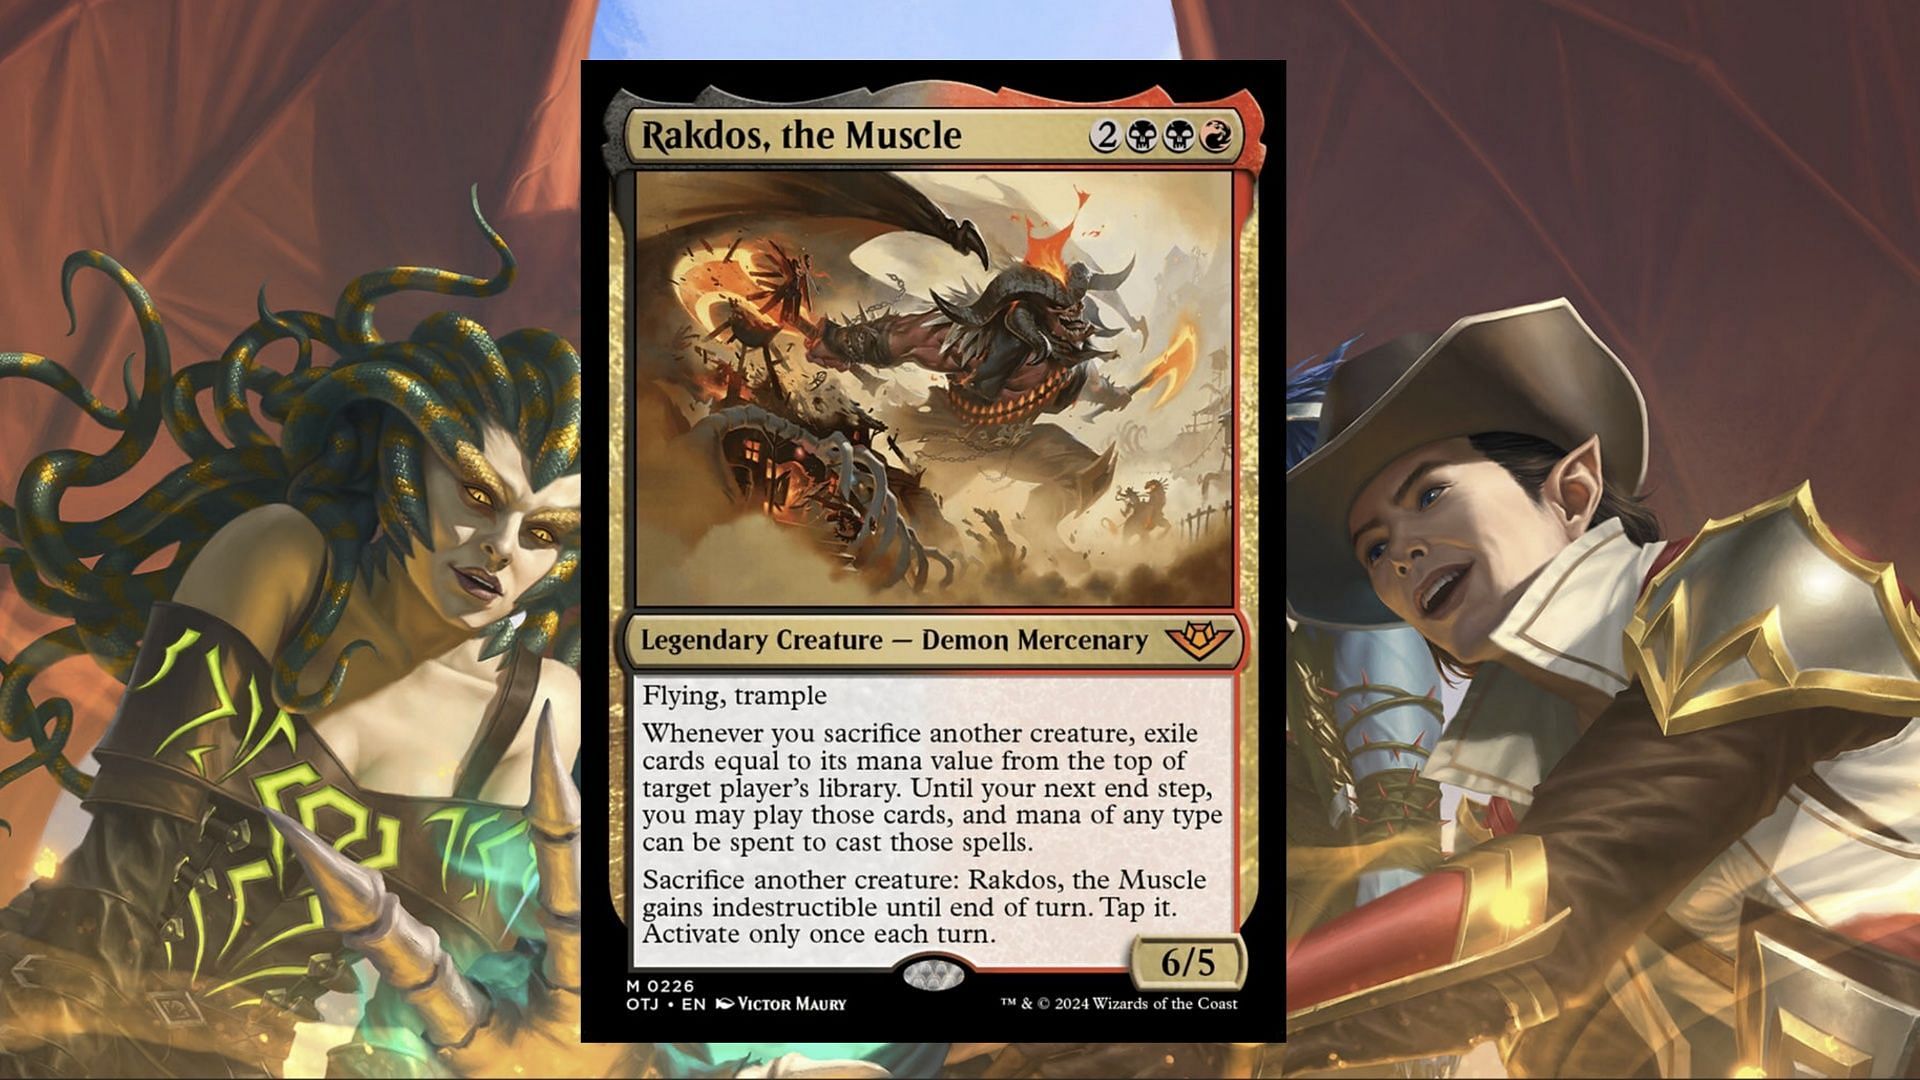 Rakdos, the Muscle in Magic: The Gathering (Image via Wizards of the Coast)